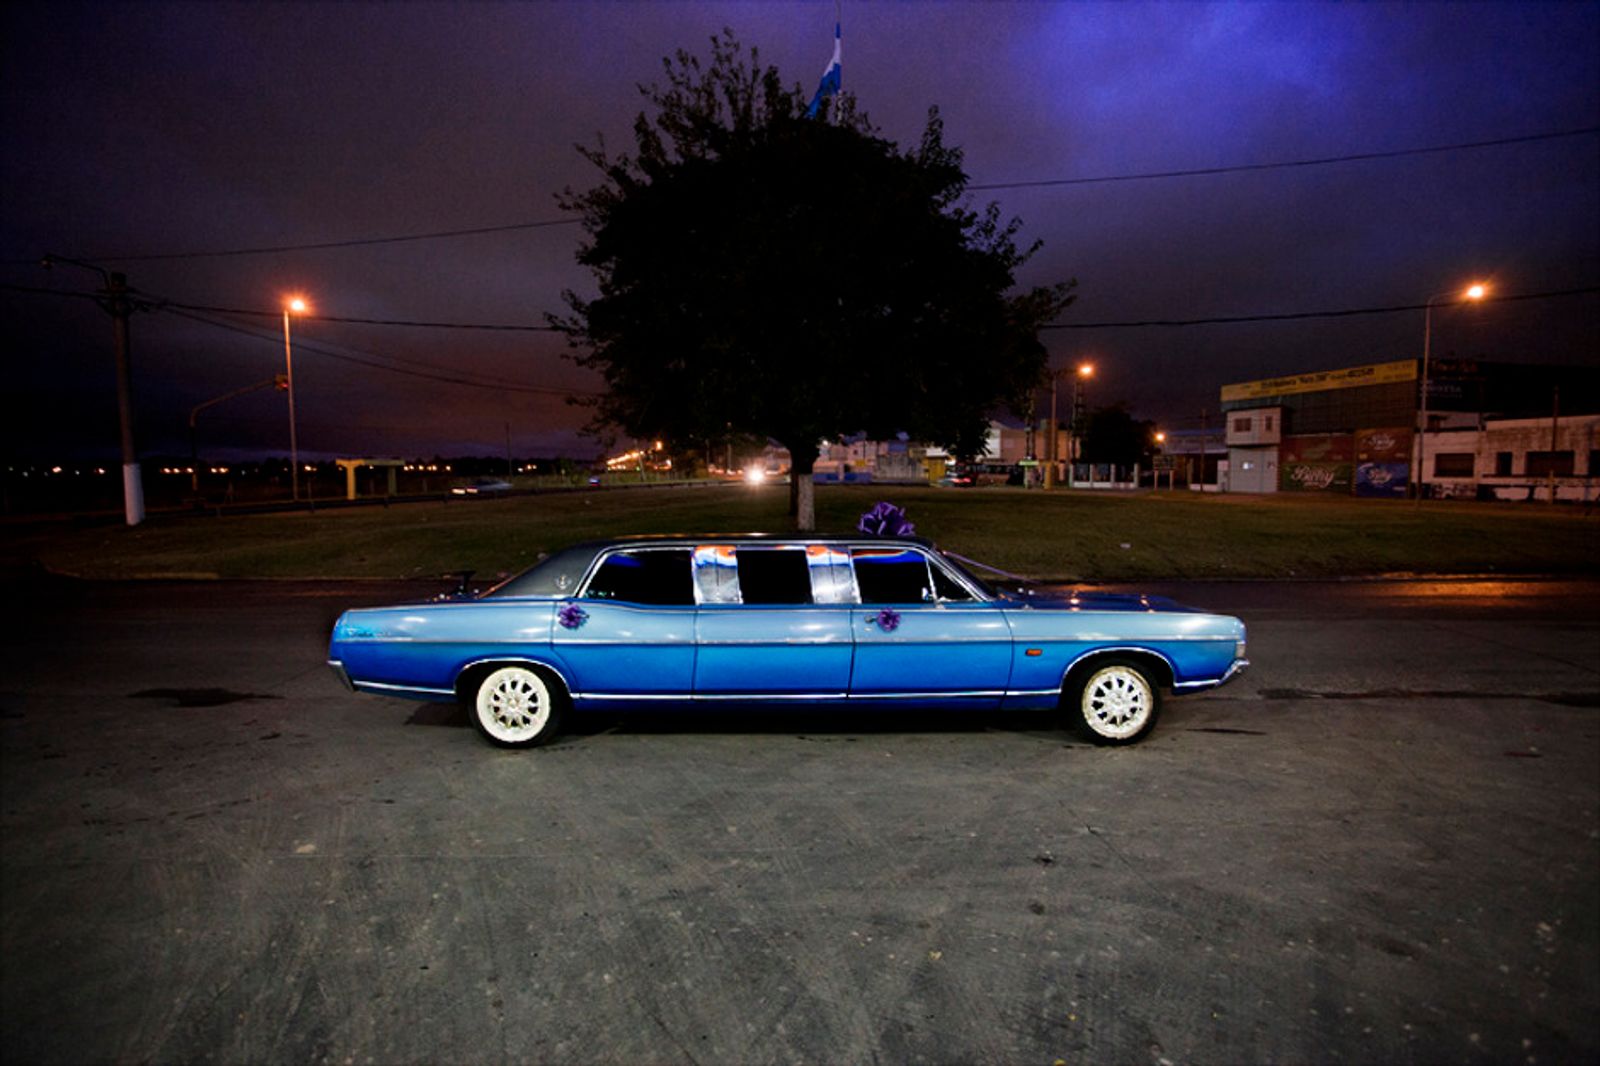 © Myriam Meloni - A Ford Fairlane from 1972, transformed into a limousine, wanders around the streets of Buenos Aires.